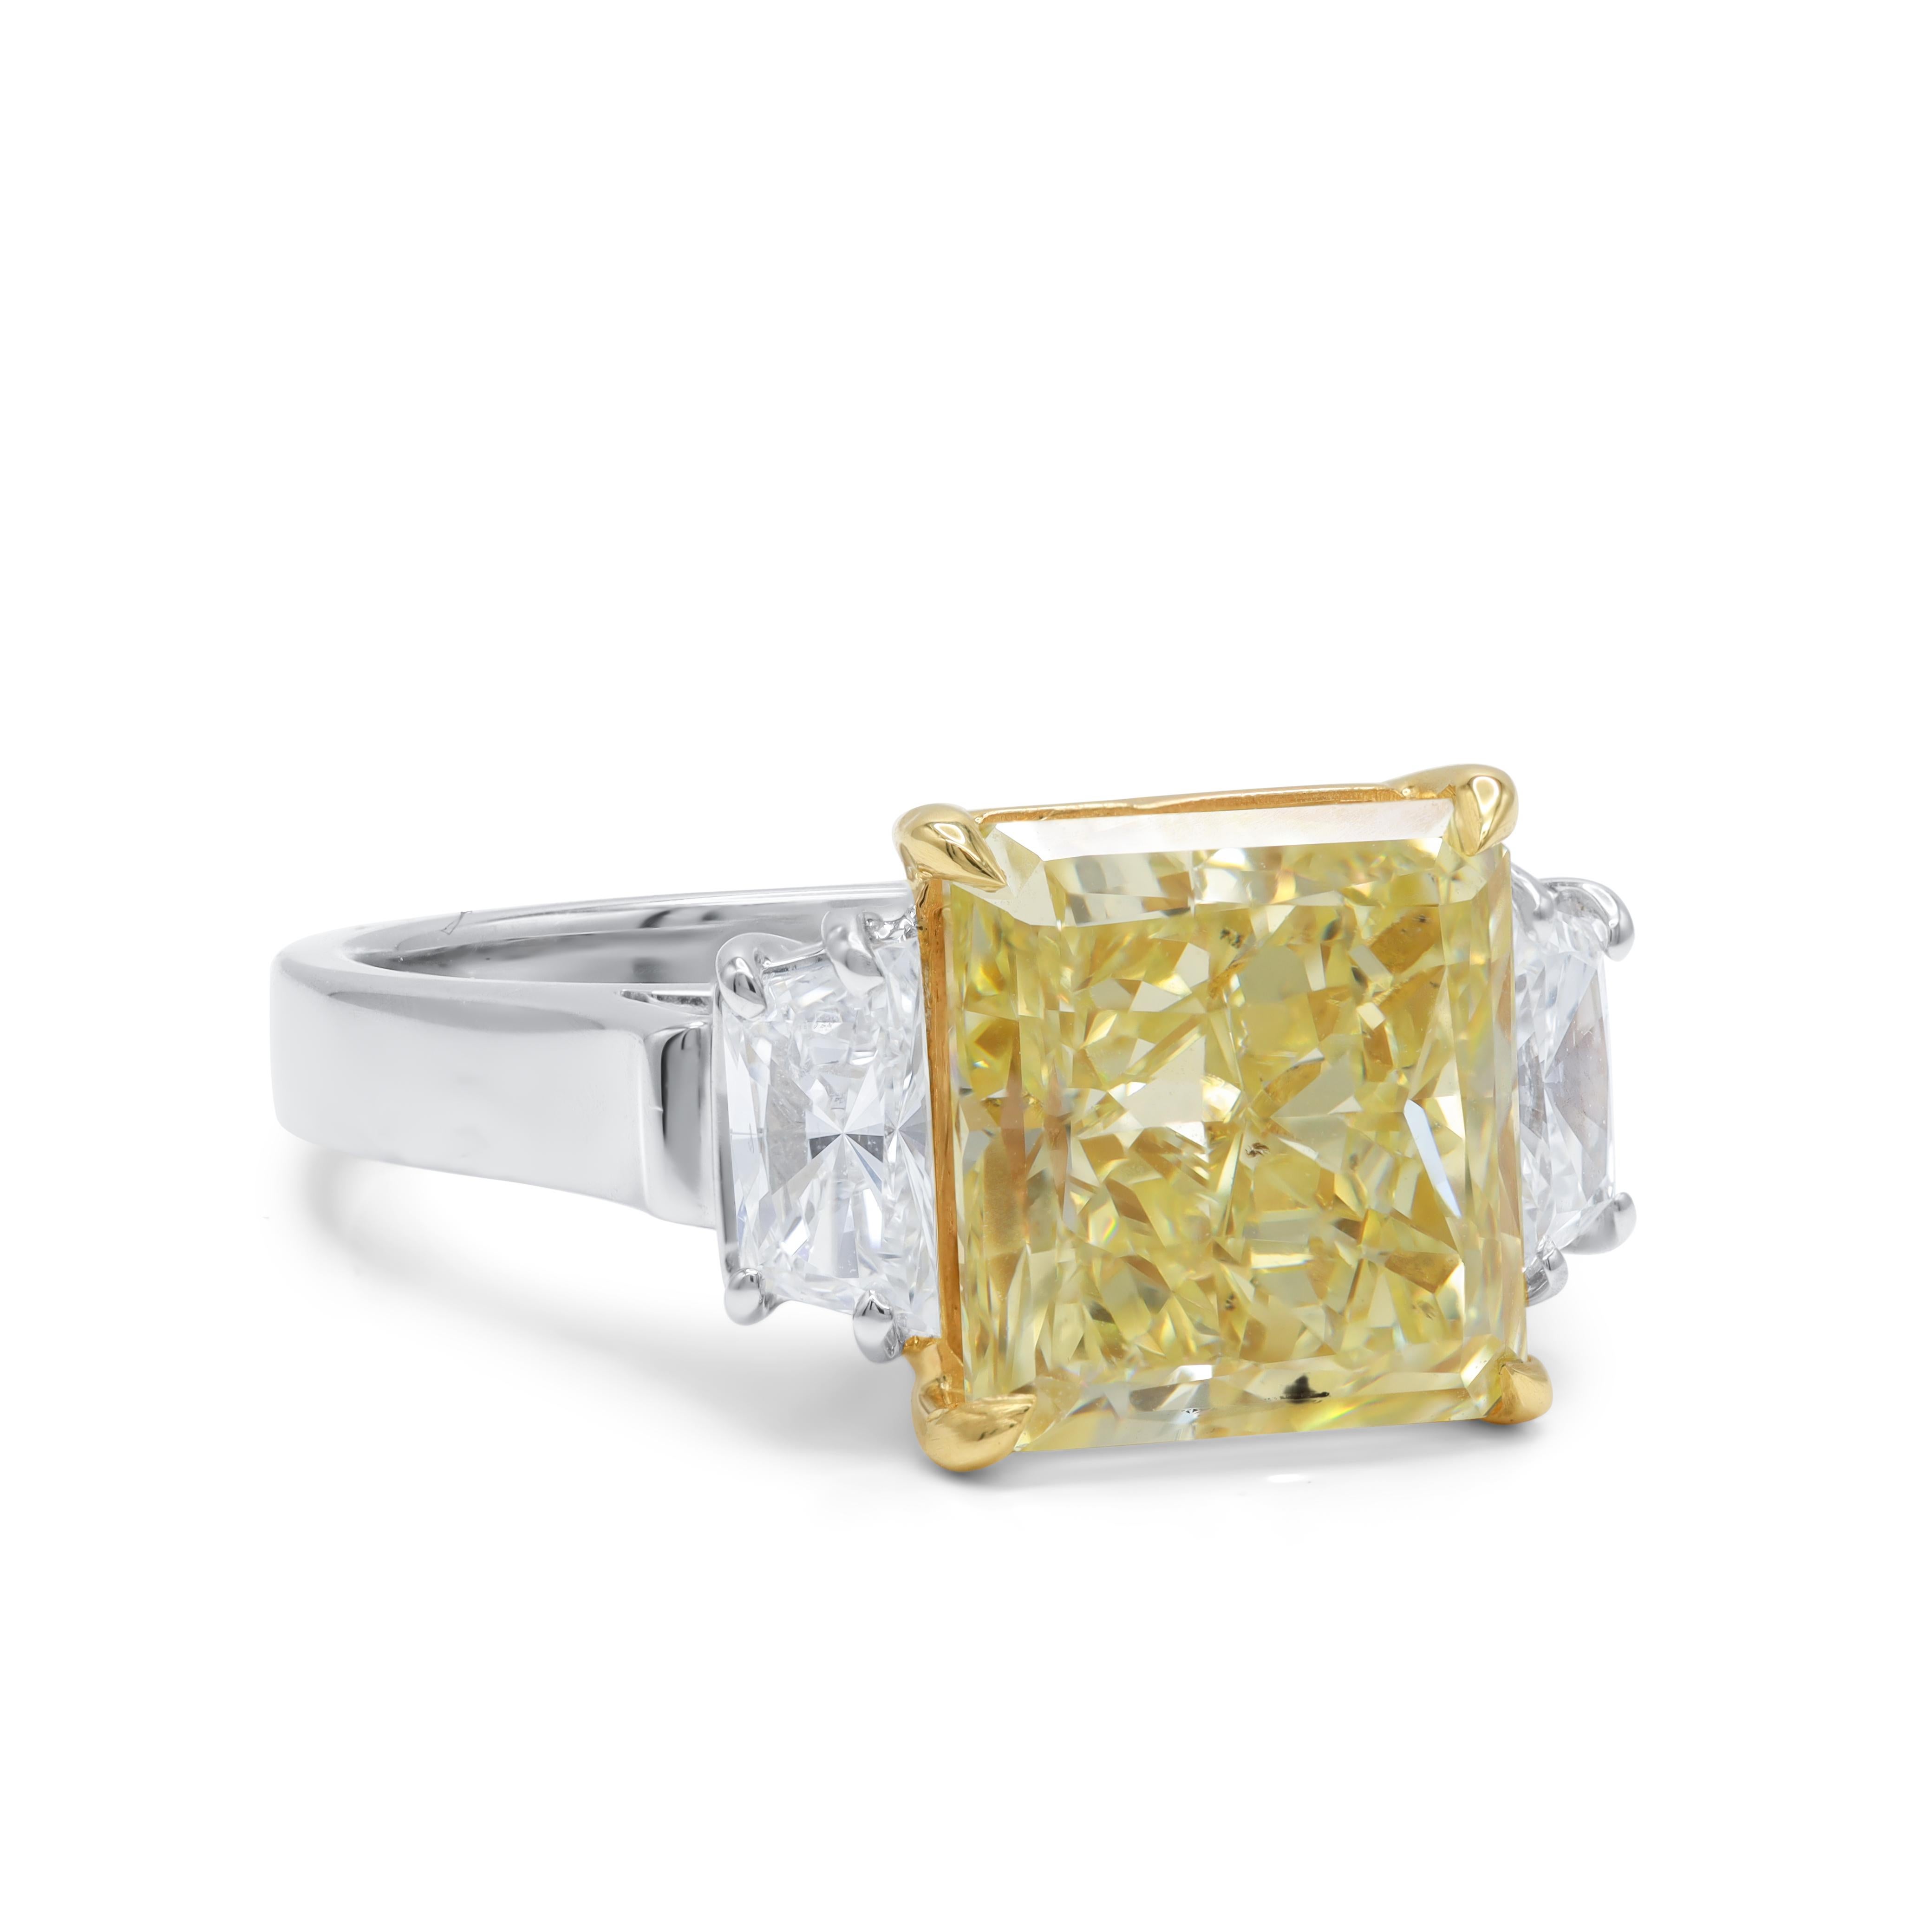 Diana M. Platinum Engagement 3 Stone Ring With 5.16 Fancy Yellow SI1 Radiant  In New Condition For Sale In New York, NY